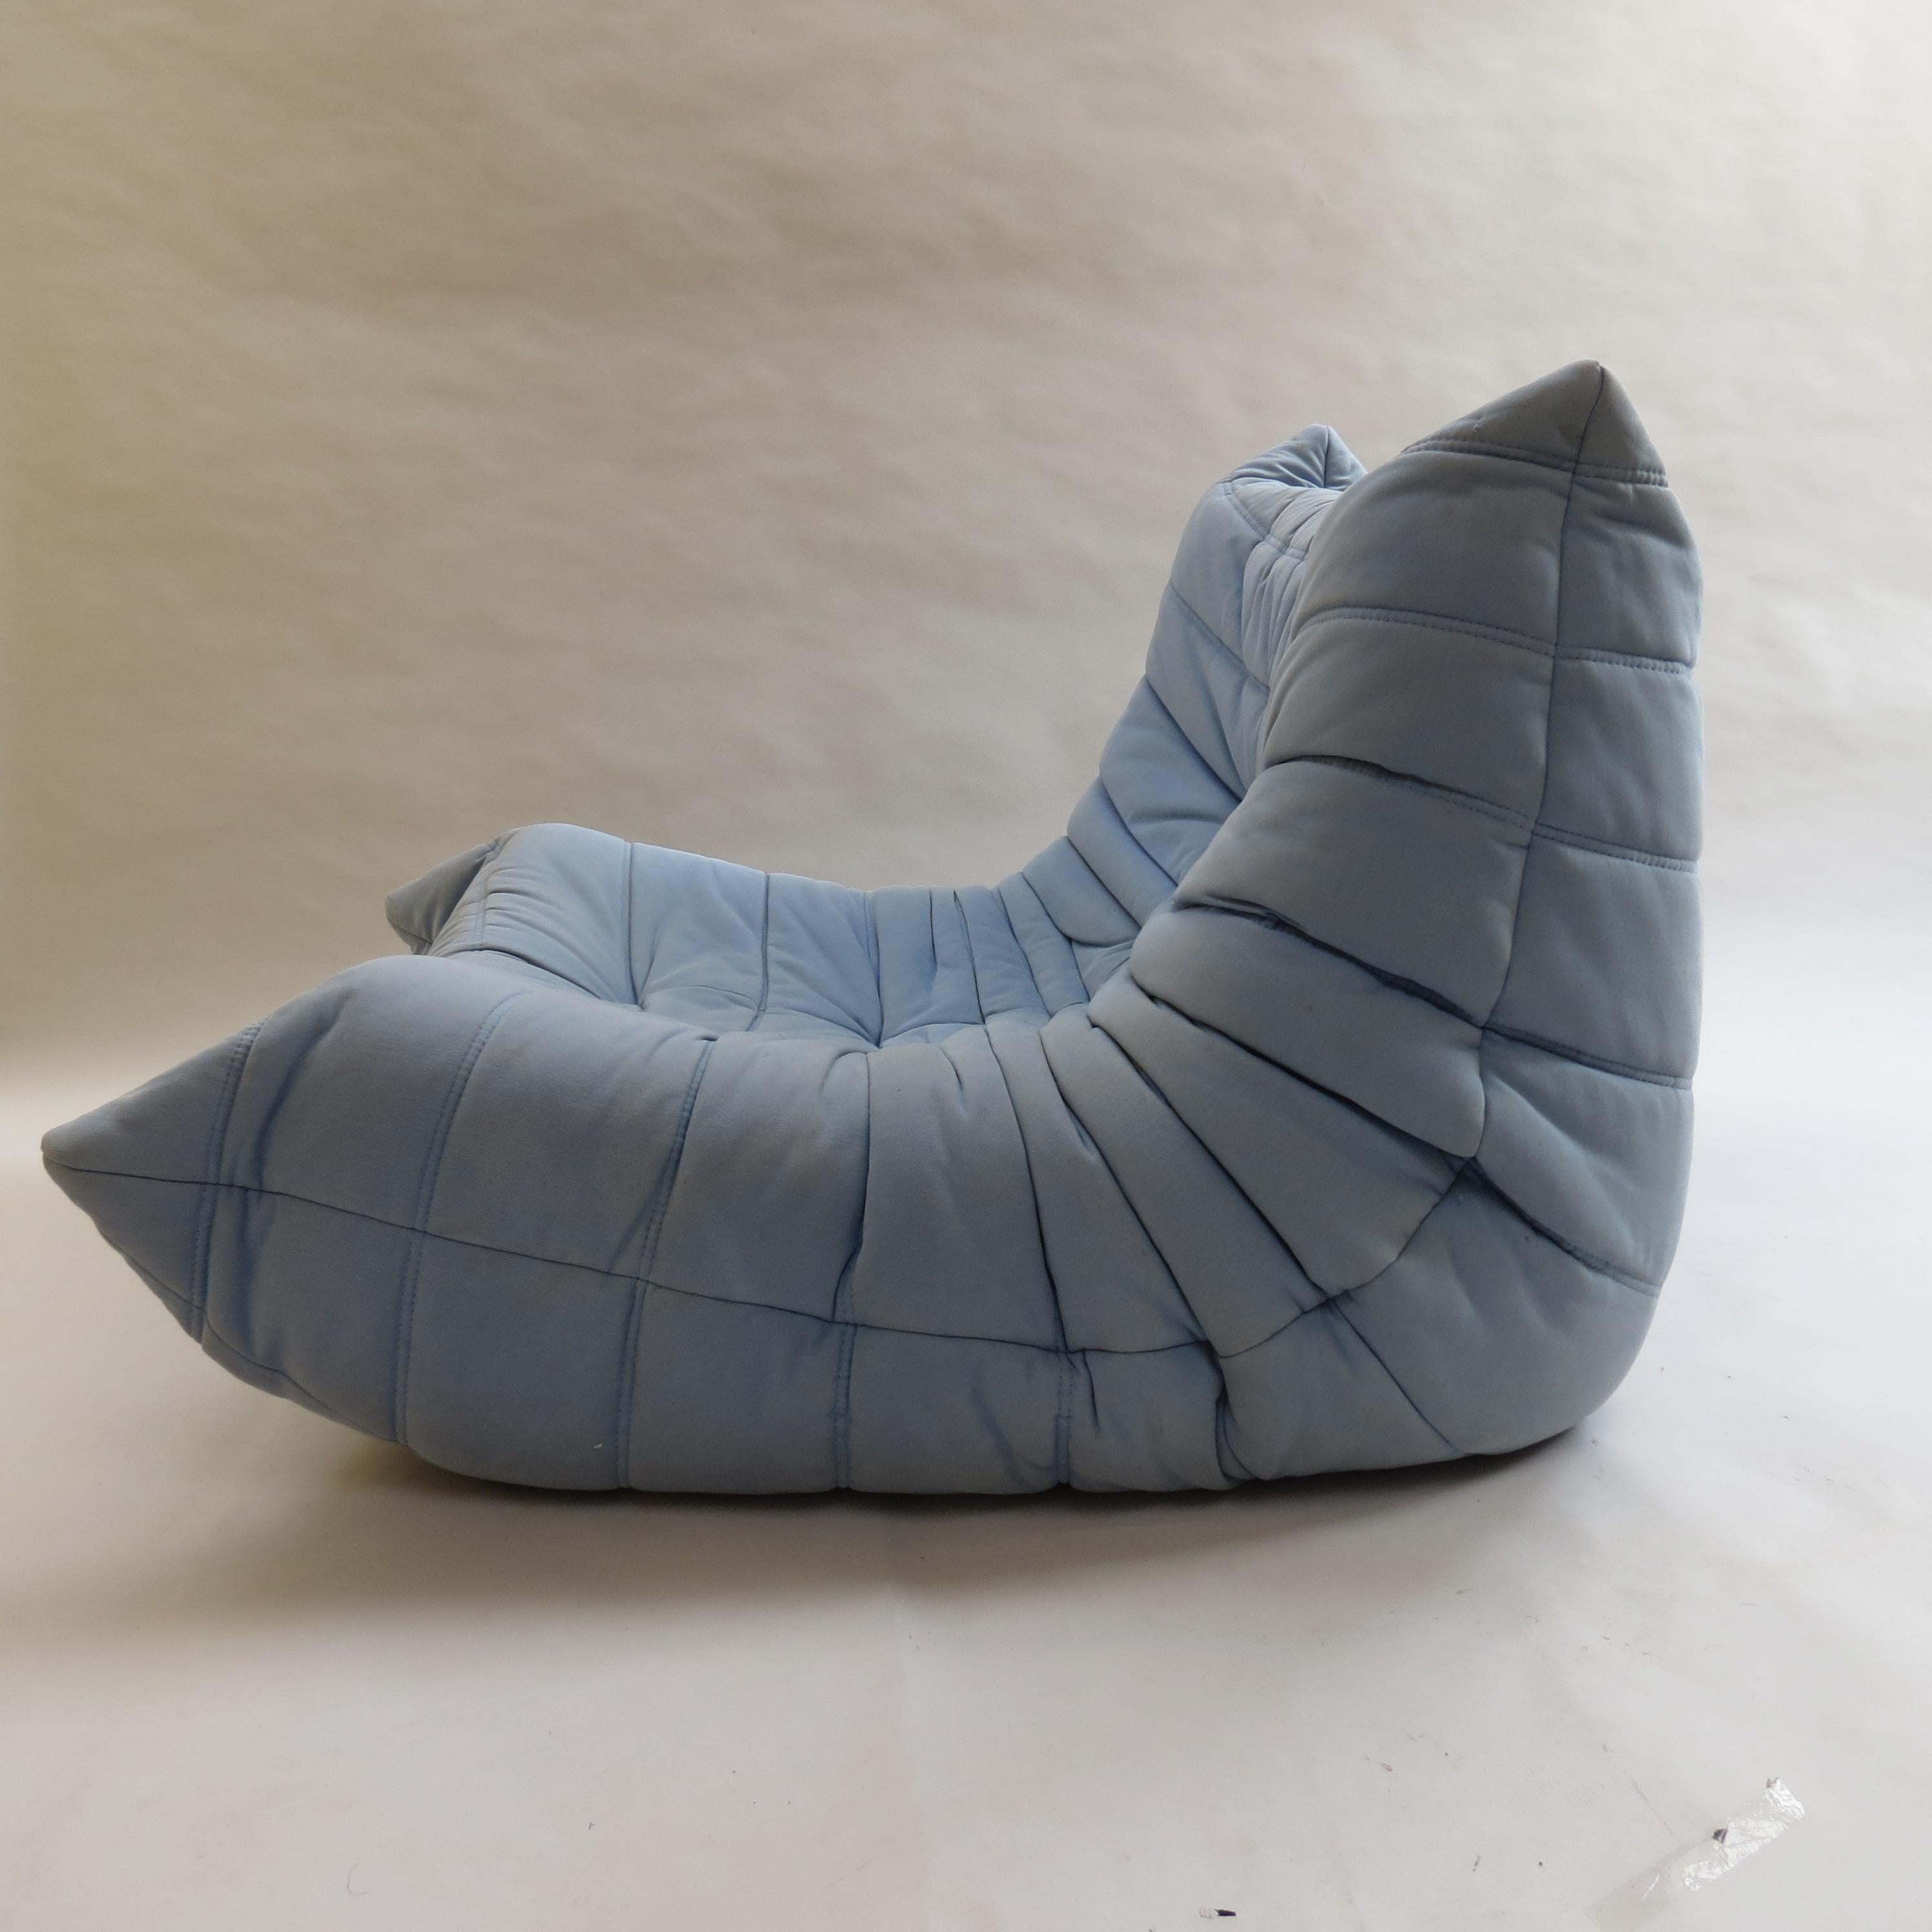 Togo sofa chair designed by Michael Ducaroy for Ligne Roset, France. Designed in 1973, this is a late 1980s-early 1990s edition. In a light blue denim type fabric.
This design Classic chair is incredibly comfortable.

 